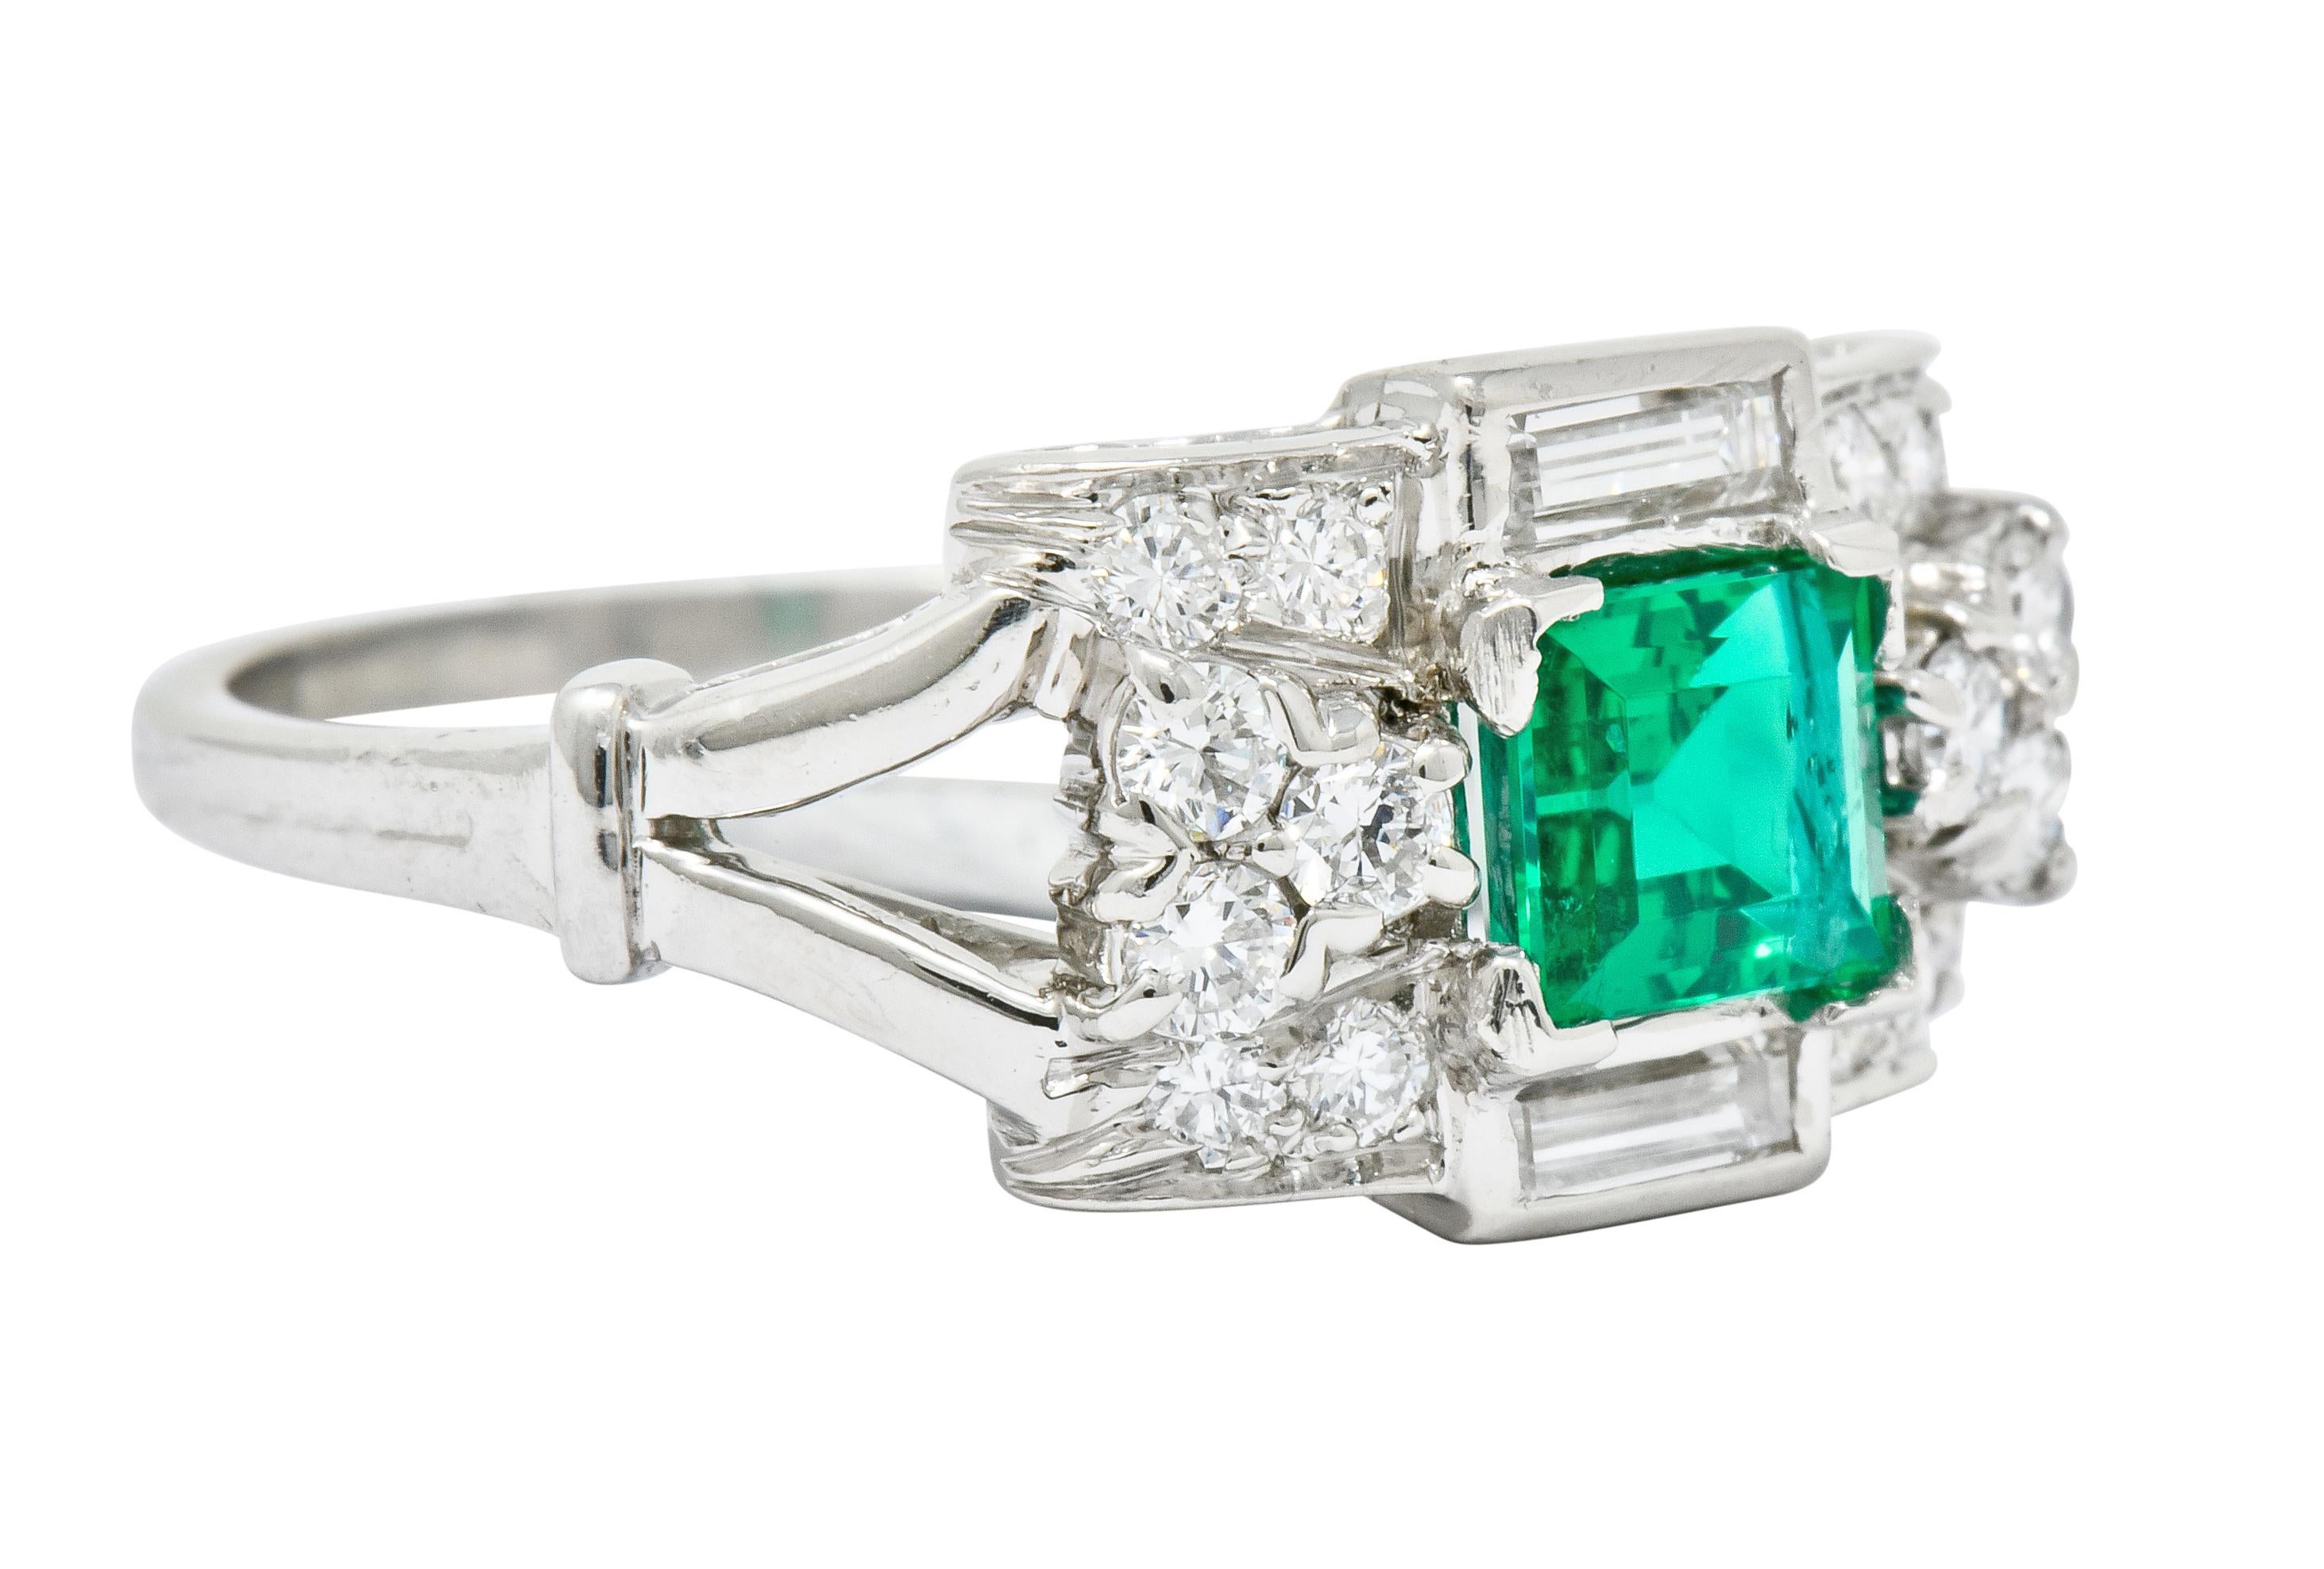 Designed as a rectangular mounting centering an emerald cut emerald weighing approximately 0.80 carat; transparent with bright saturated green coloring

With two baguette cut diamonds, bezel set North and South of emerald, weighing approximately